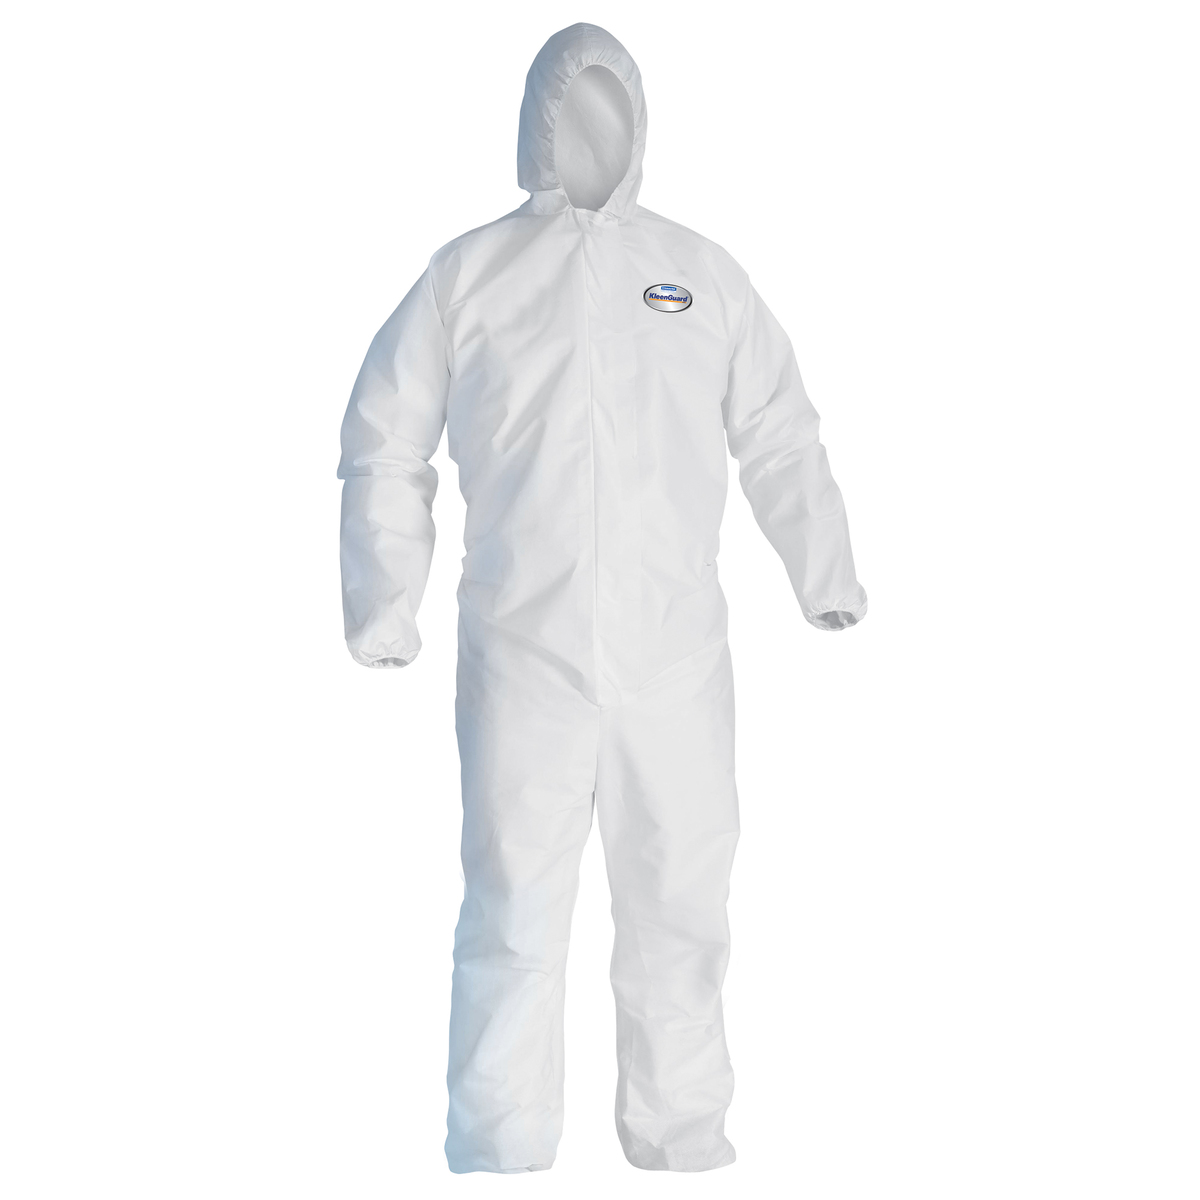 Case of 25 KleenGuard A40 44324 Hooded White Protective Coveralls XL for sale online 